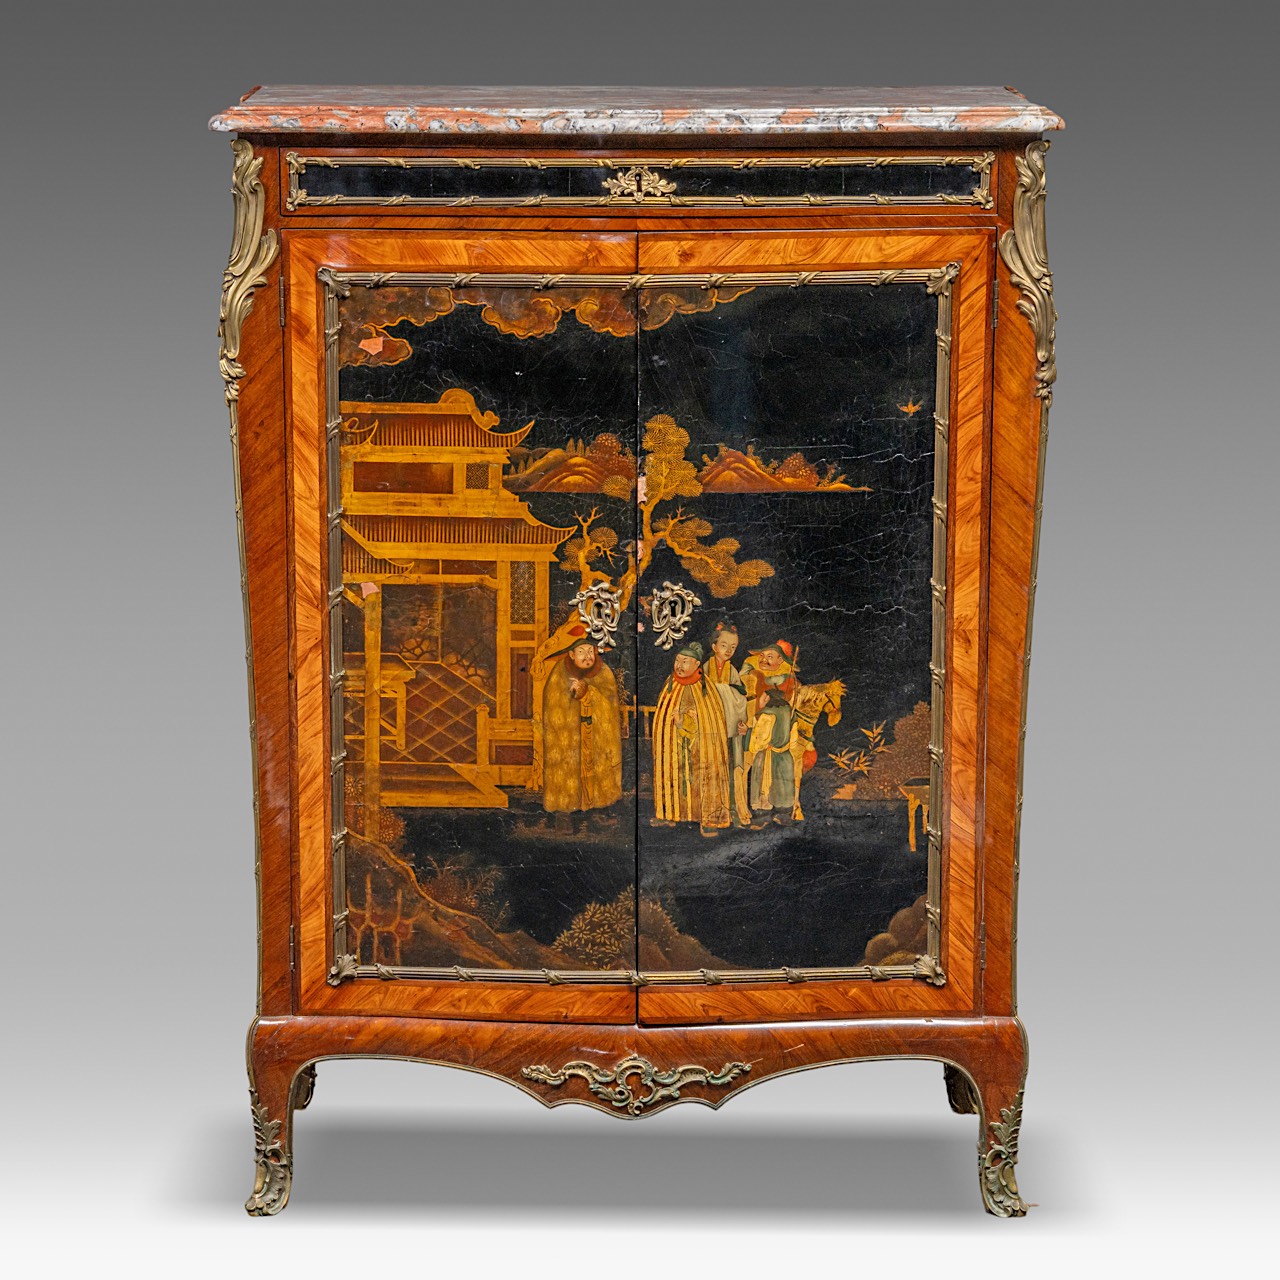 A marble-topped Louis XV (1723-1774) chinoiserie lacquered cabinet, H0125 cm - W 92 cm - D 47,5 cm - Image 2 of 8